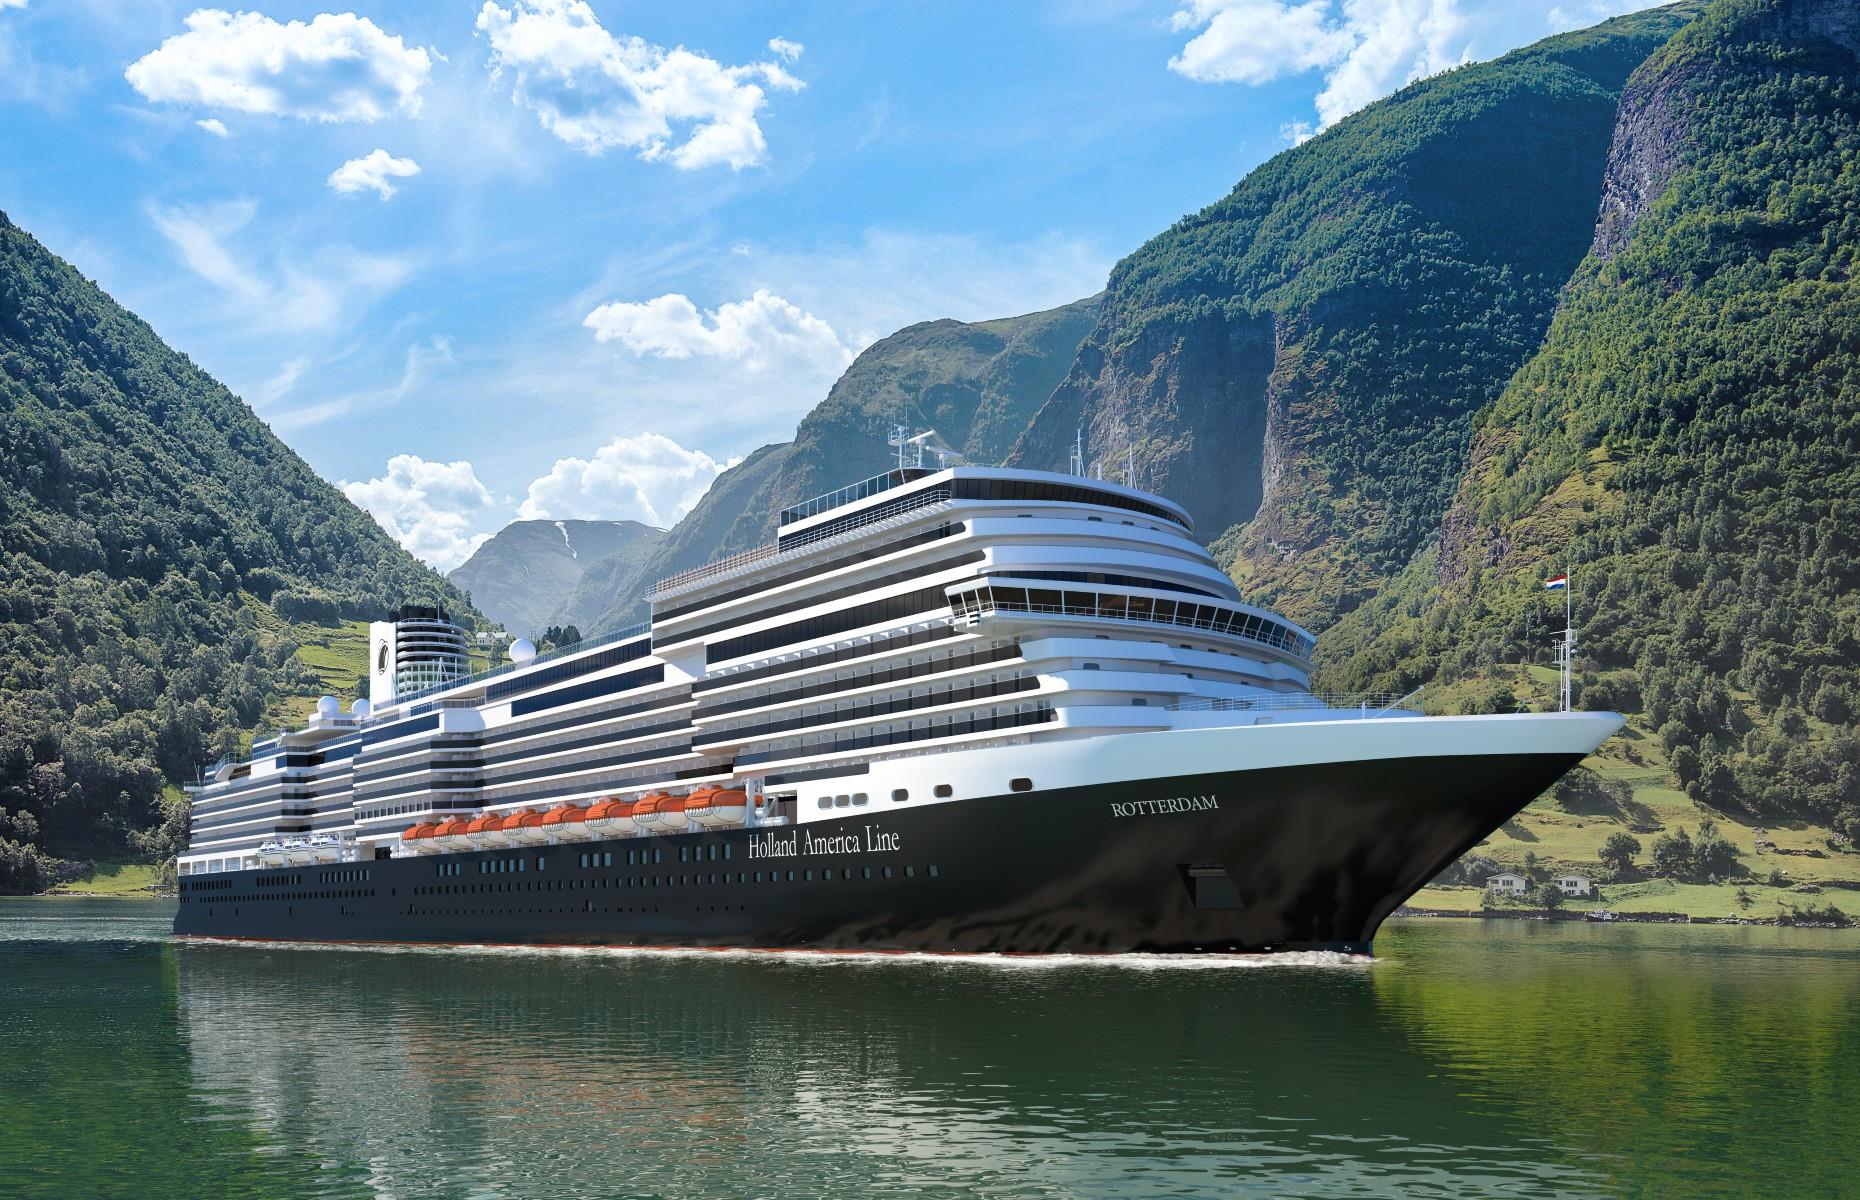 <p>The 2,668-guest <a href="https://www.hollandamerica.com/en_US/cruise-ships/ms-rotterdam/0.html">MS Rotterdam</a> is the third in the Pinnacle Class series for Holland America Line. At 984 feet (300m) in length, the craftmanship used to create the classic nautical lines of the ship’s exterior reflects almost 150 years of expertise within the company. Her interiors dazzle too, with fluid lines, vibrant colours and airy, light-filled spaces from the shared areas to the staterooms and suites.</p>